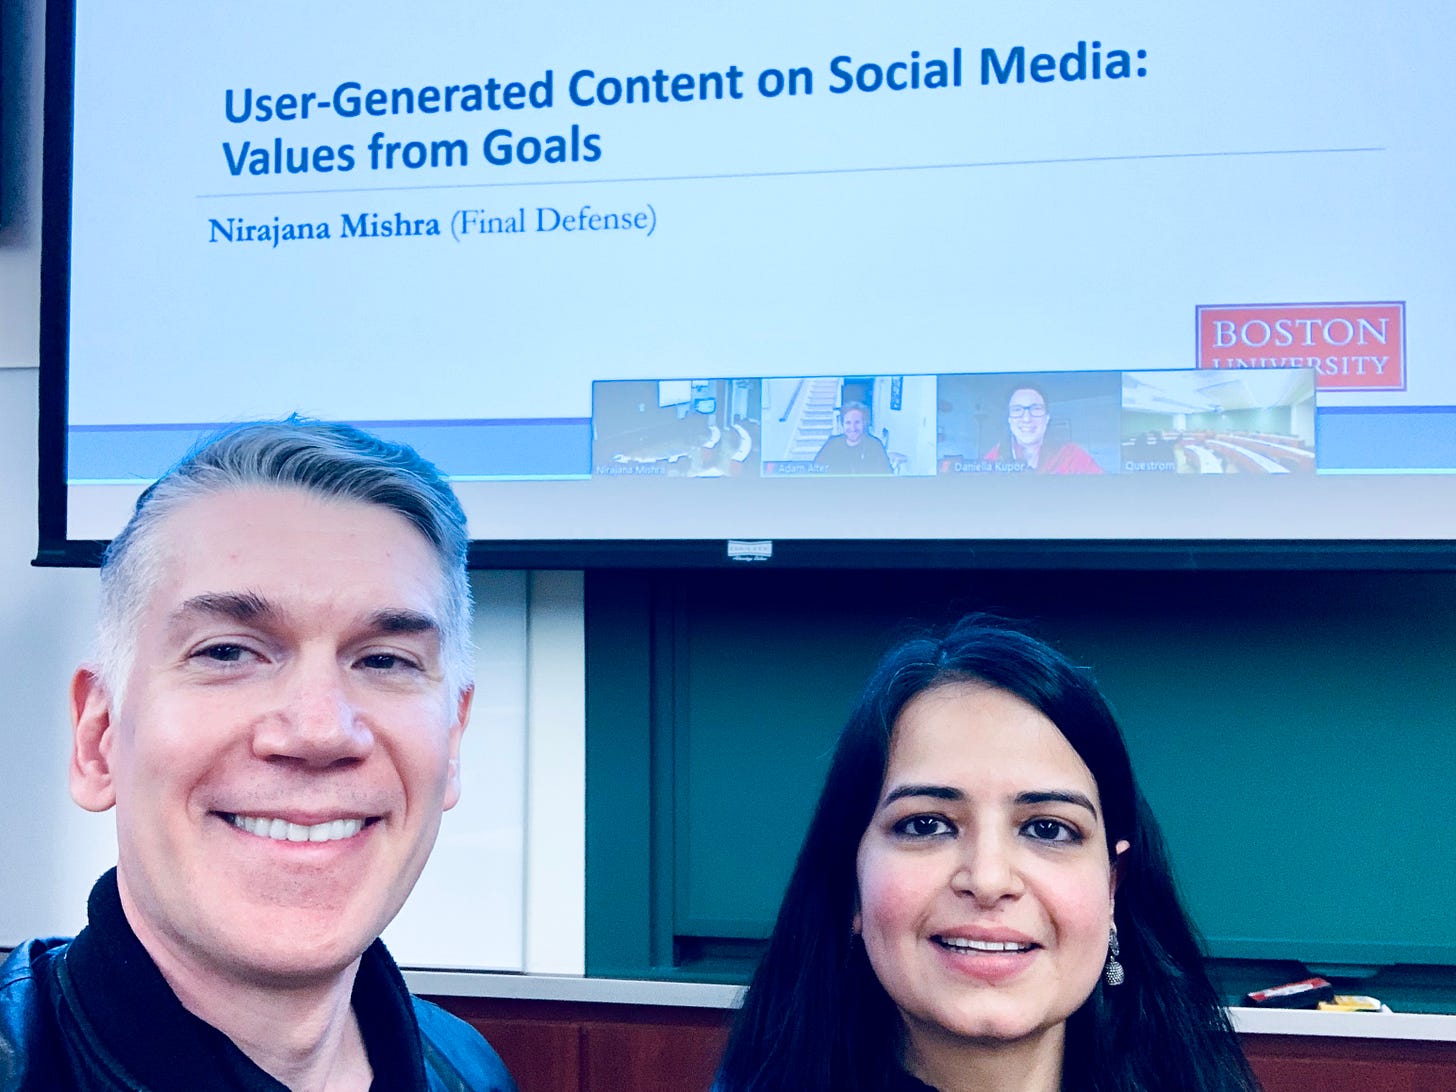 Dr. Carey Morewedge (left) and Dr. Nirajana Mishra (right) at her dissertation defense. A title slide for Dr. Mishra's presentation is in the background and reads "User-Generated Content on Social Media: Values from Goals."